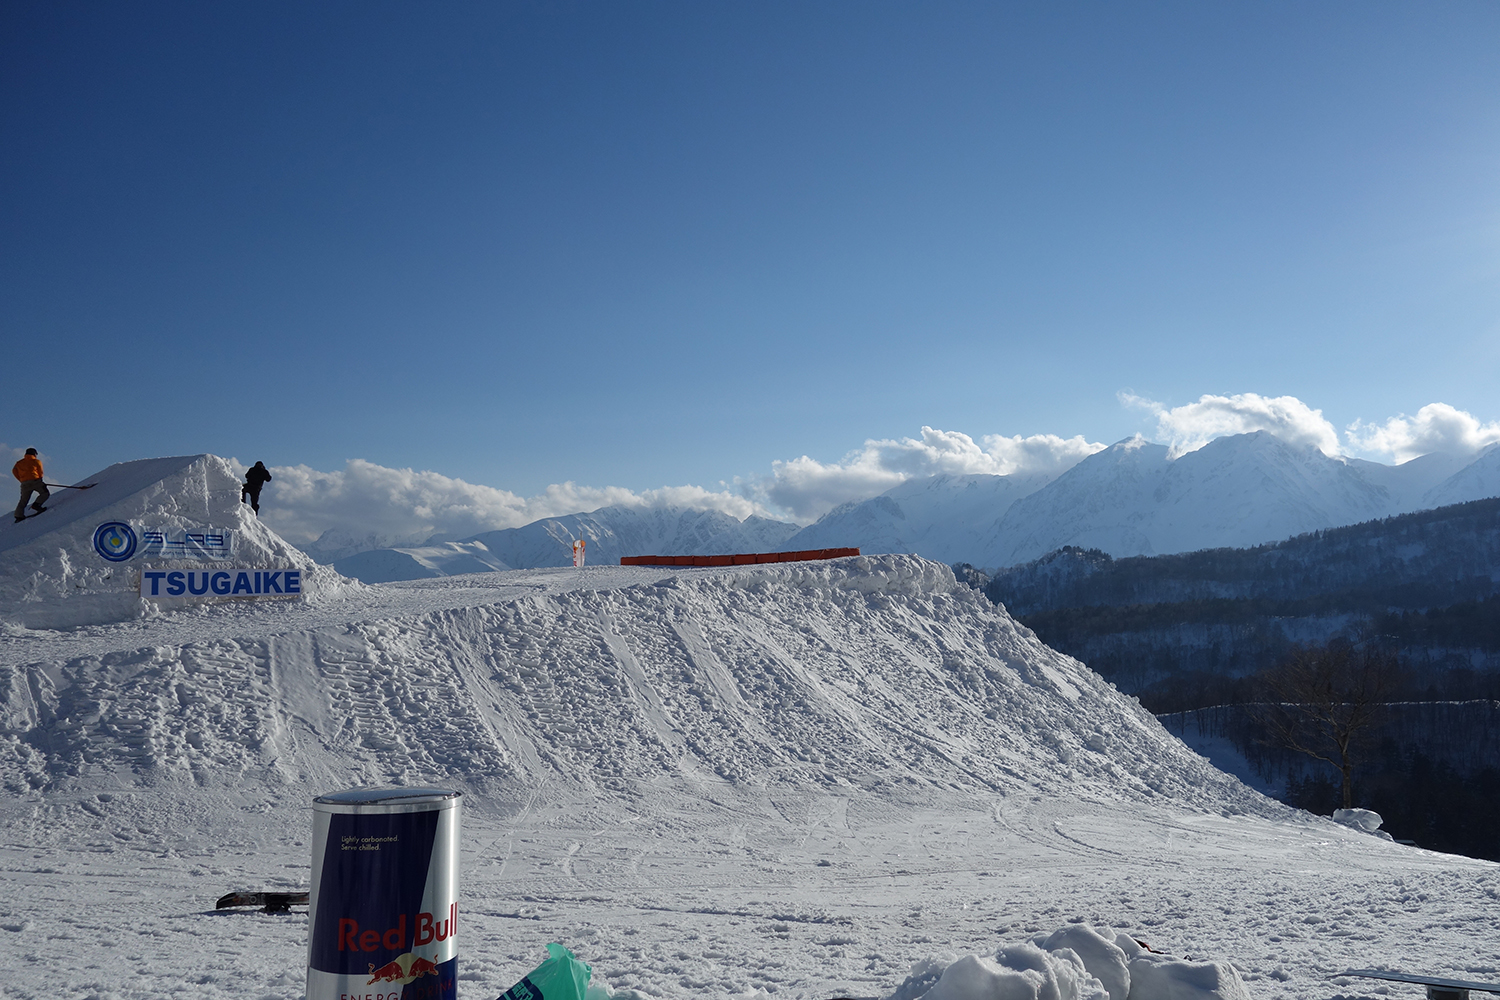 A session event was held in Nagano and Tsugaike Kogen to push your limits with a world-class kicker.It was a very interesting event so I couldn't slip, but I ran a car and went to see it for only one day.